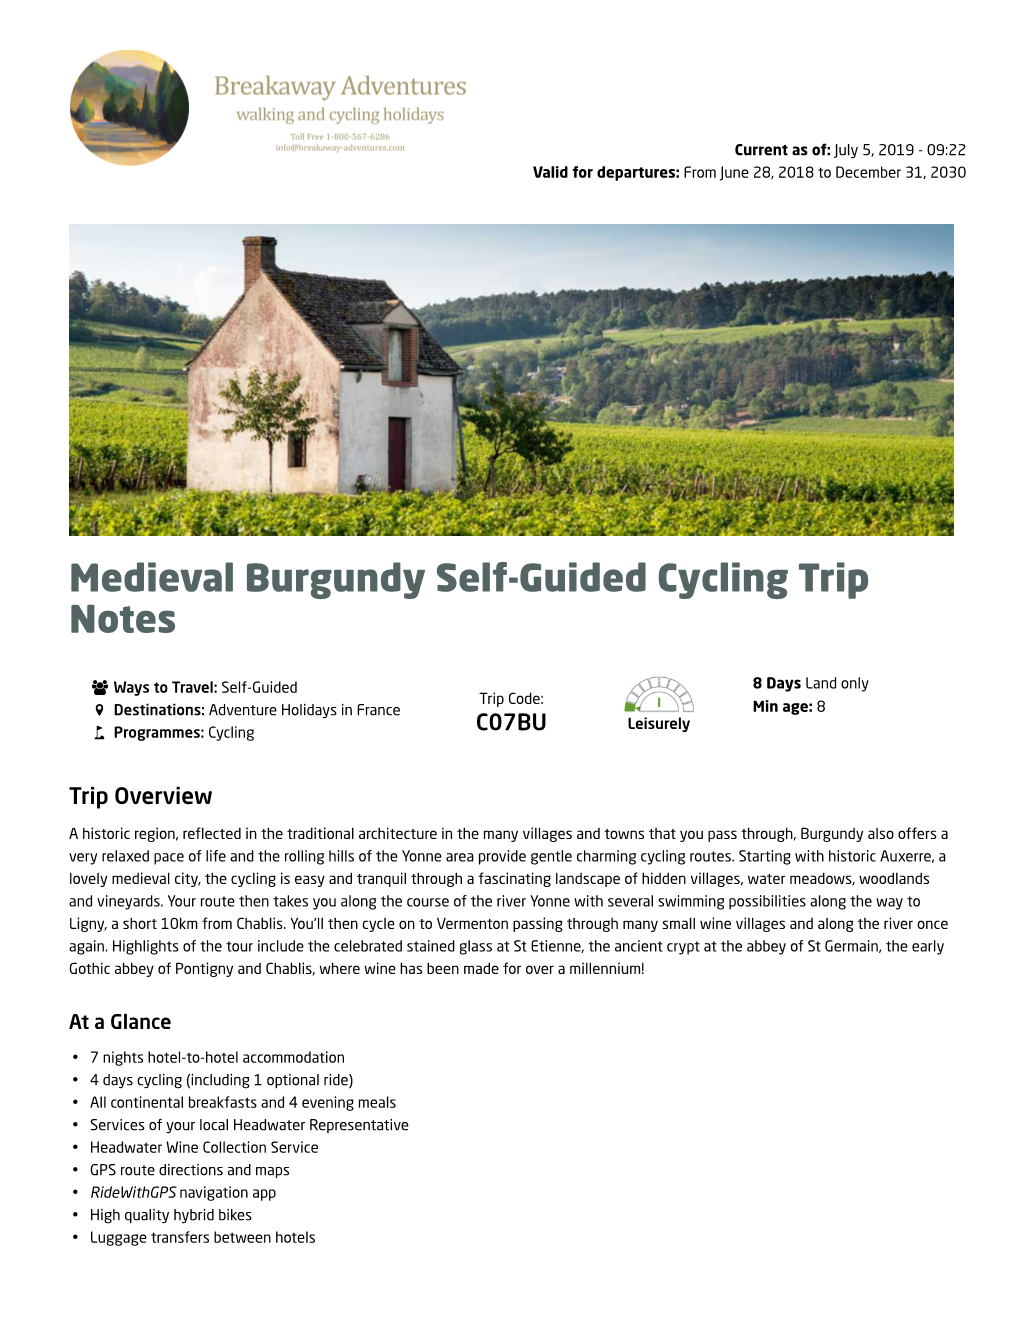 Medieval Burgundy Self-Guided Cycling Trip Notes